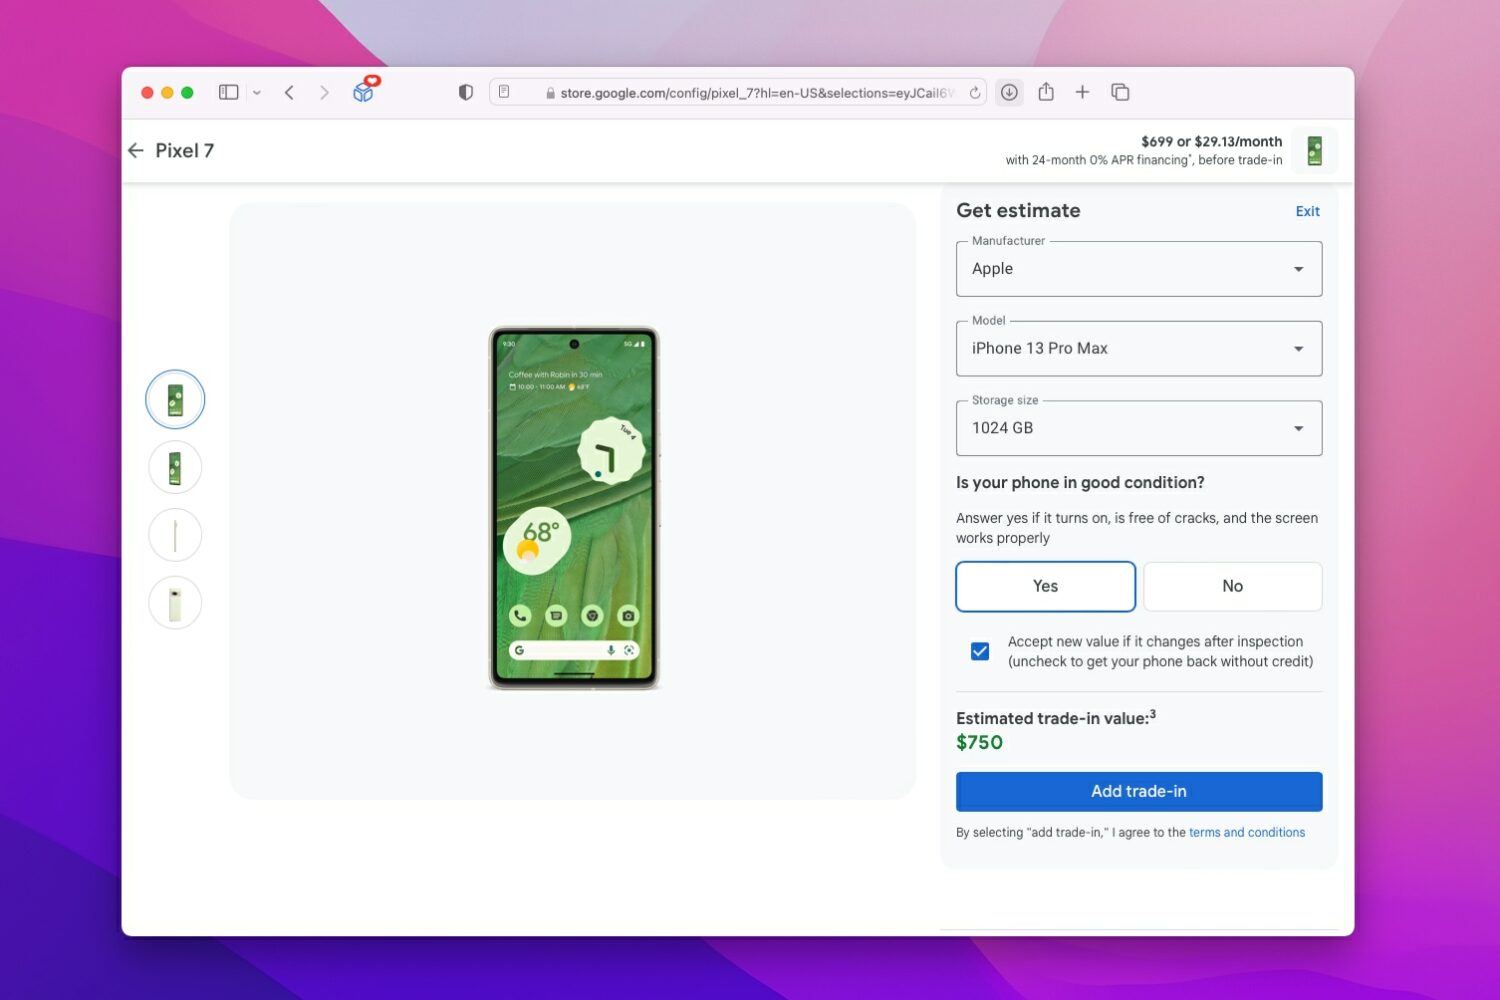 Screenshot of the Google Store showing trading in 1TB iPhone 13 Pro Max toward Pixel 7 purchase